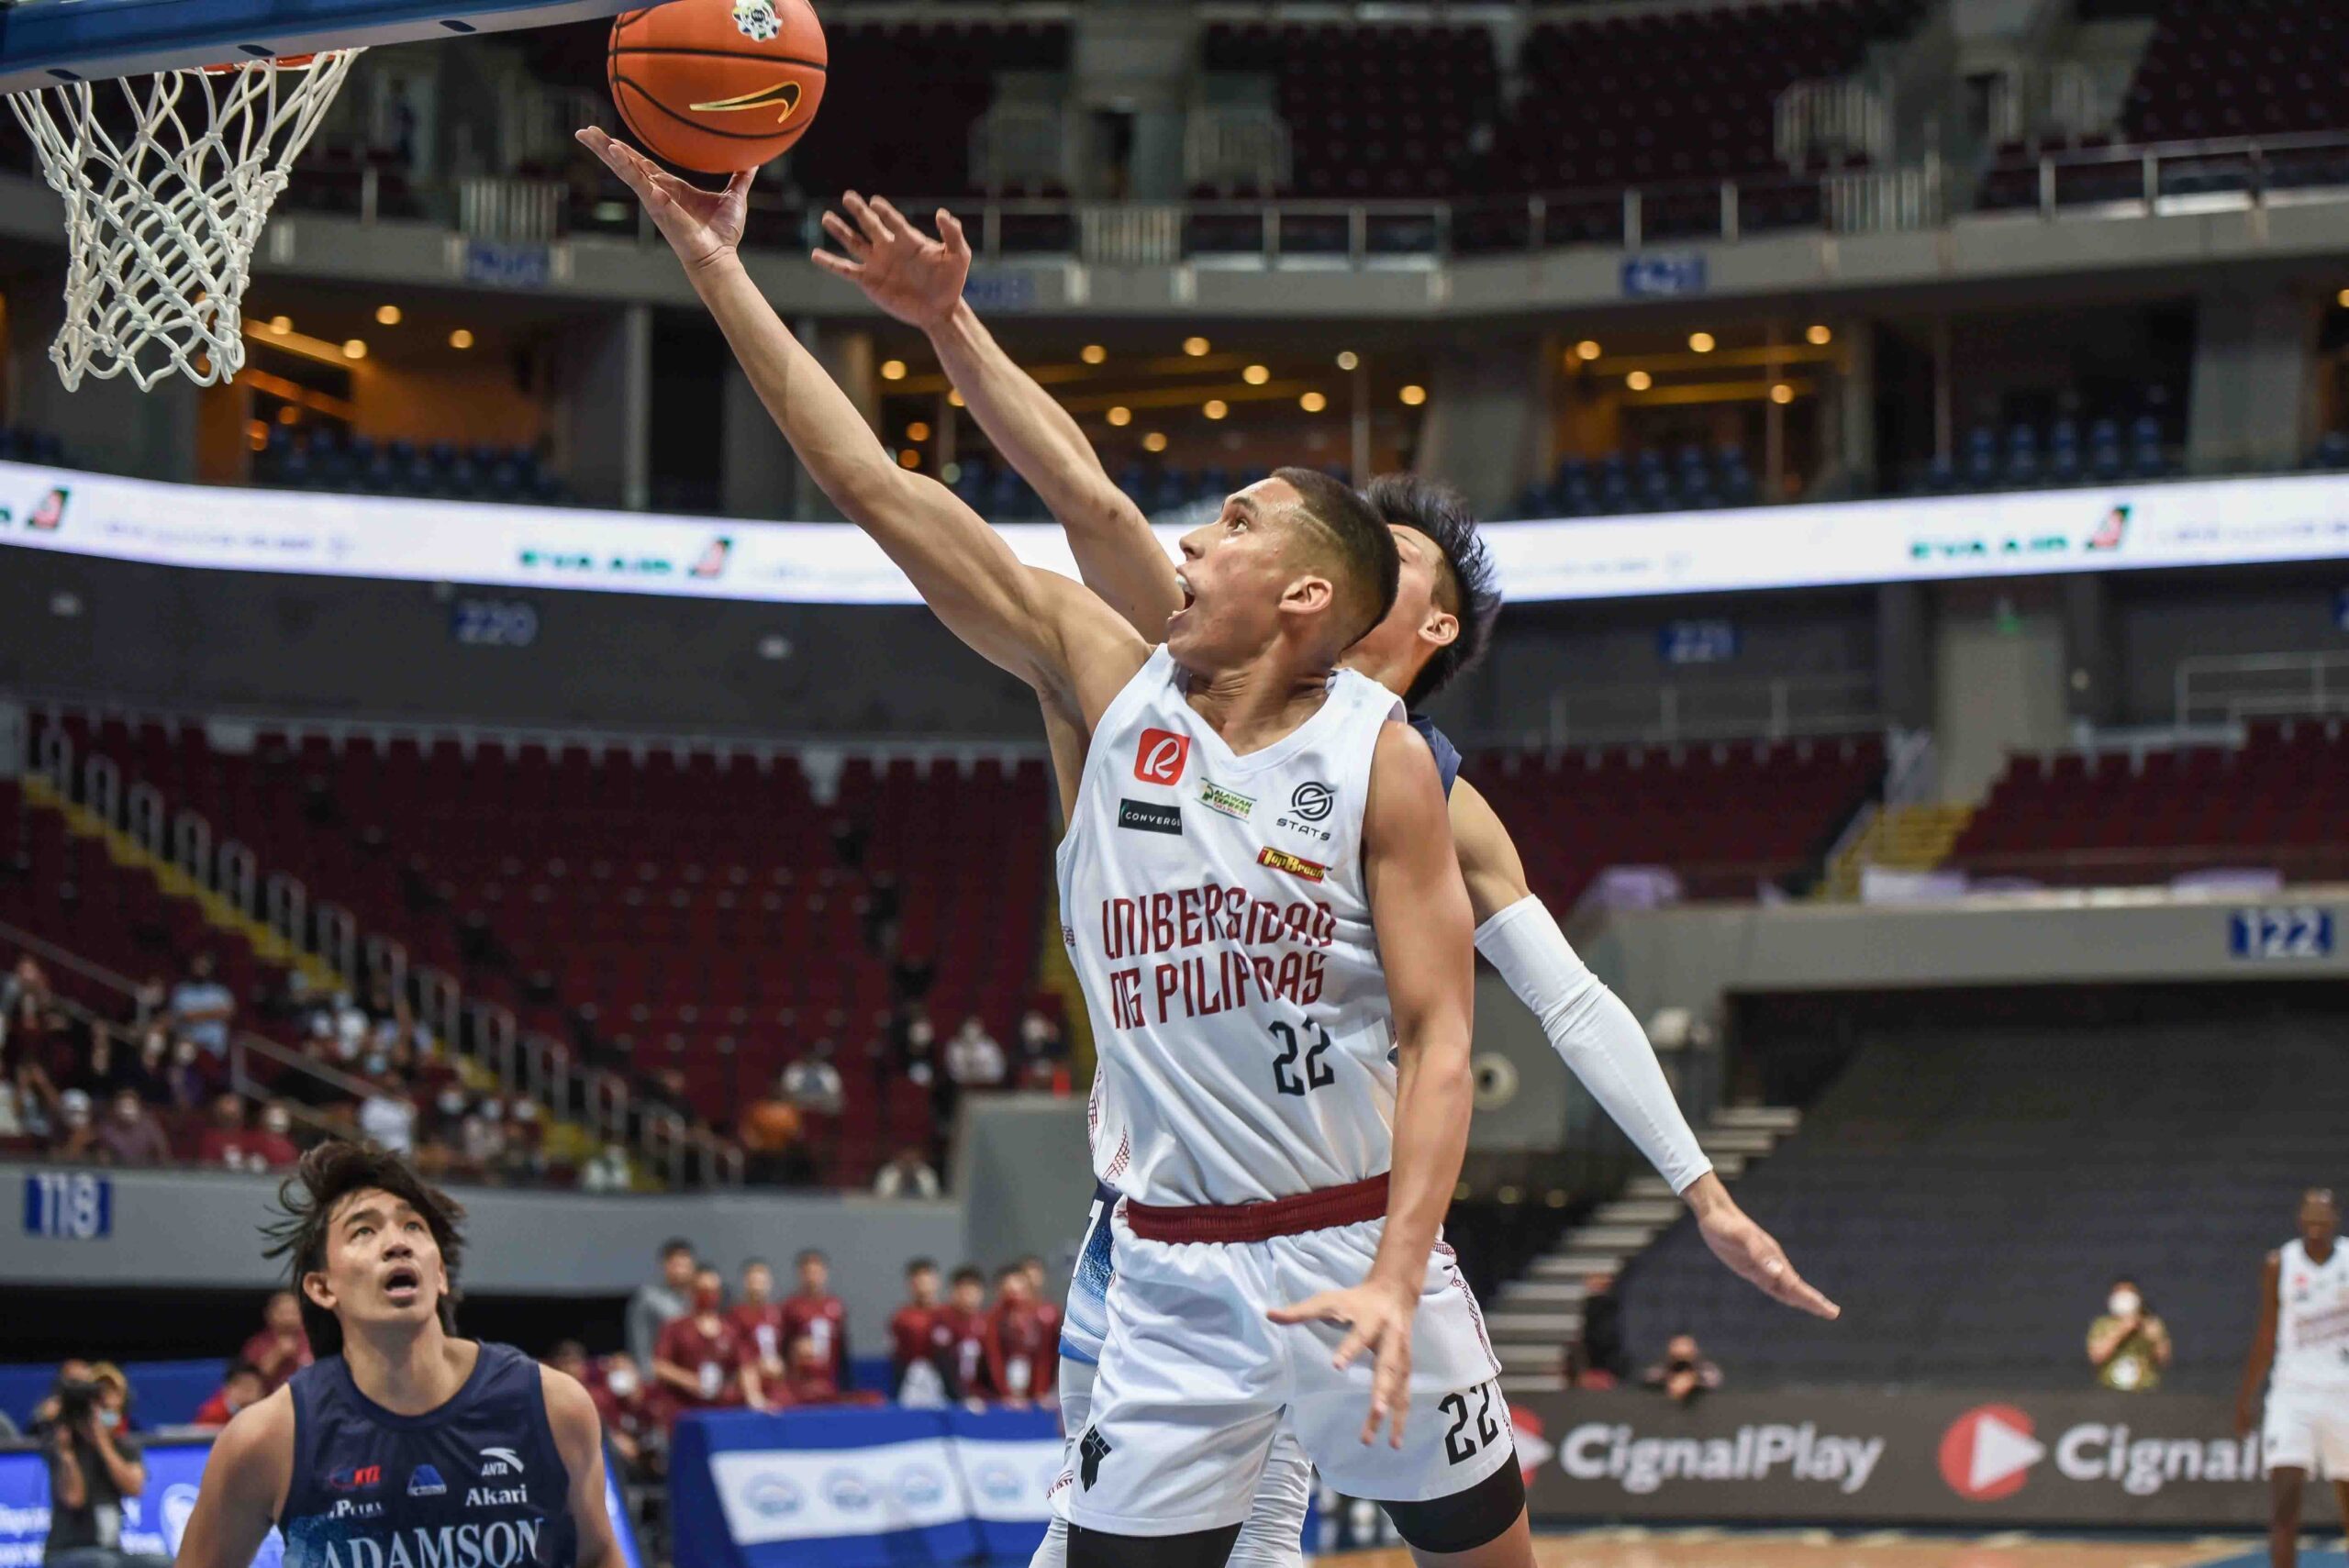 Lastimosa misses game-winner as UP survives Adamson for 4th straight win